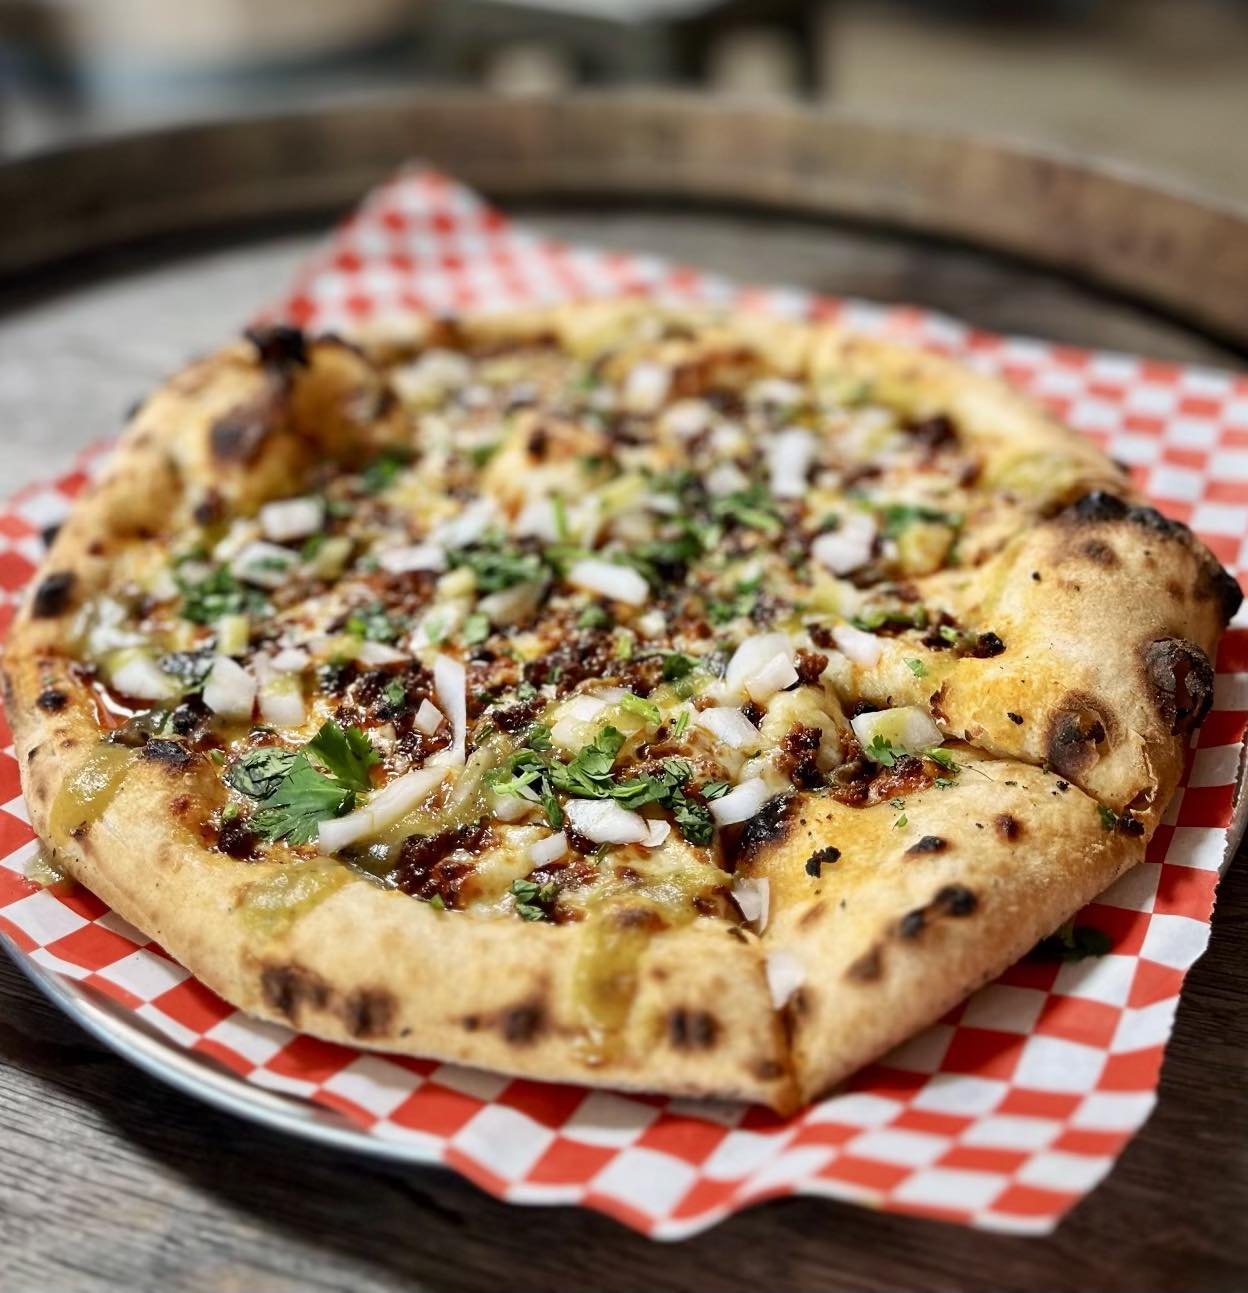 It&rsquo;s Cinco de Mayo and we&rsquo;re serving up our Plethora of Pi&ntilde;atas Vienna Mexican Lager alongside our delicious Pie of the Month created by Ulises! The pizza boasts Chorizo, white onions, fiorantino mozzarella, cilantro, and drizzled 